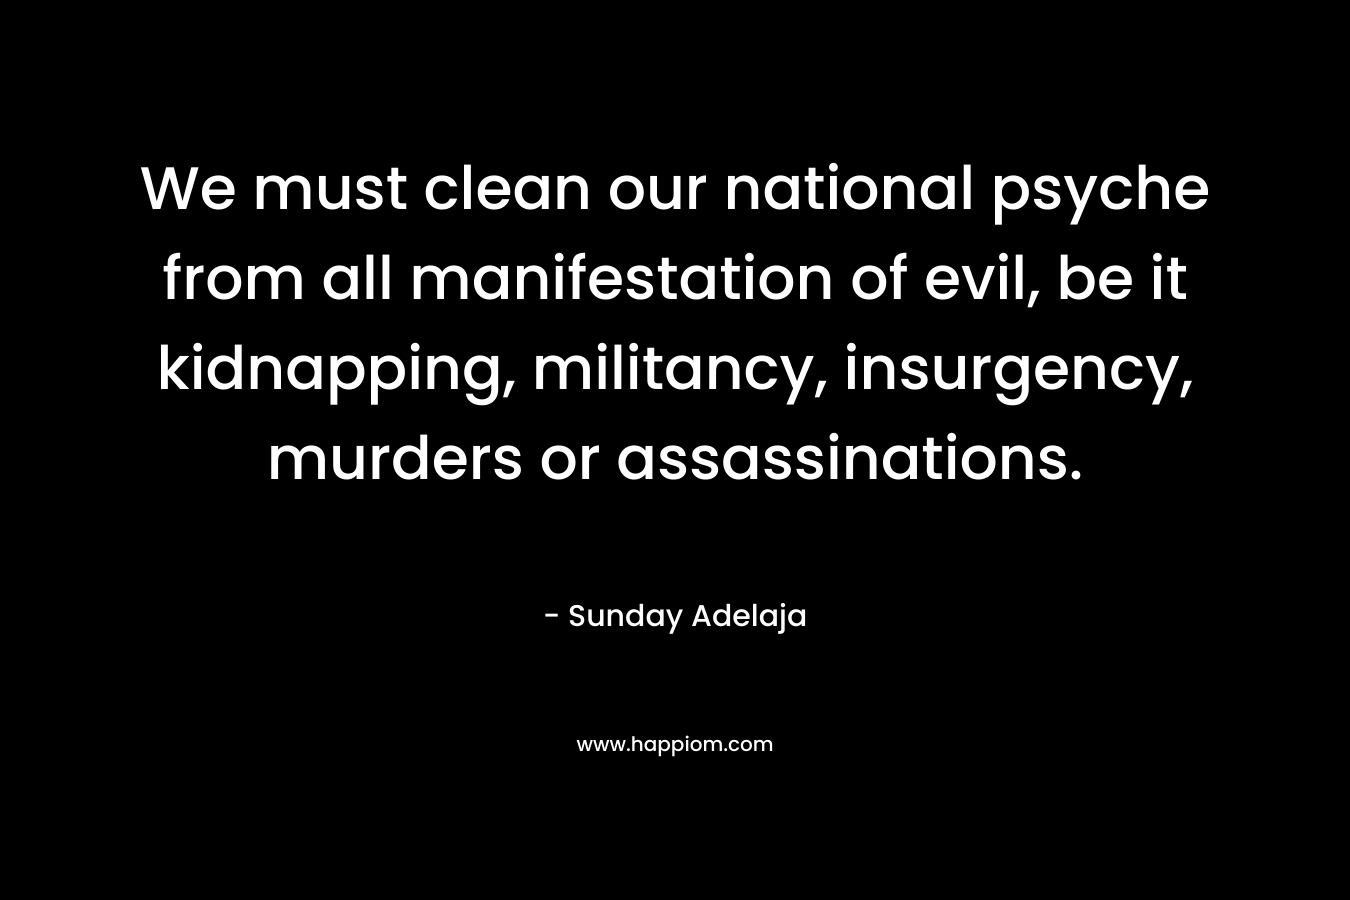 We must clean our national psyche from all manifestation of evil, be it kidnapping, militancy, insurgency, murders or assassinations.